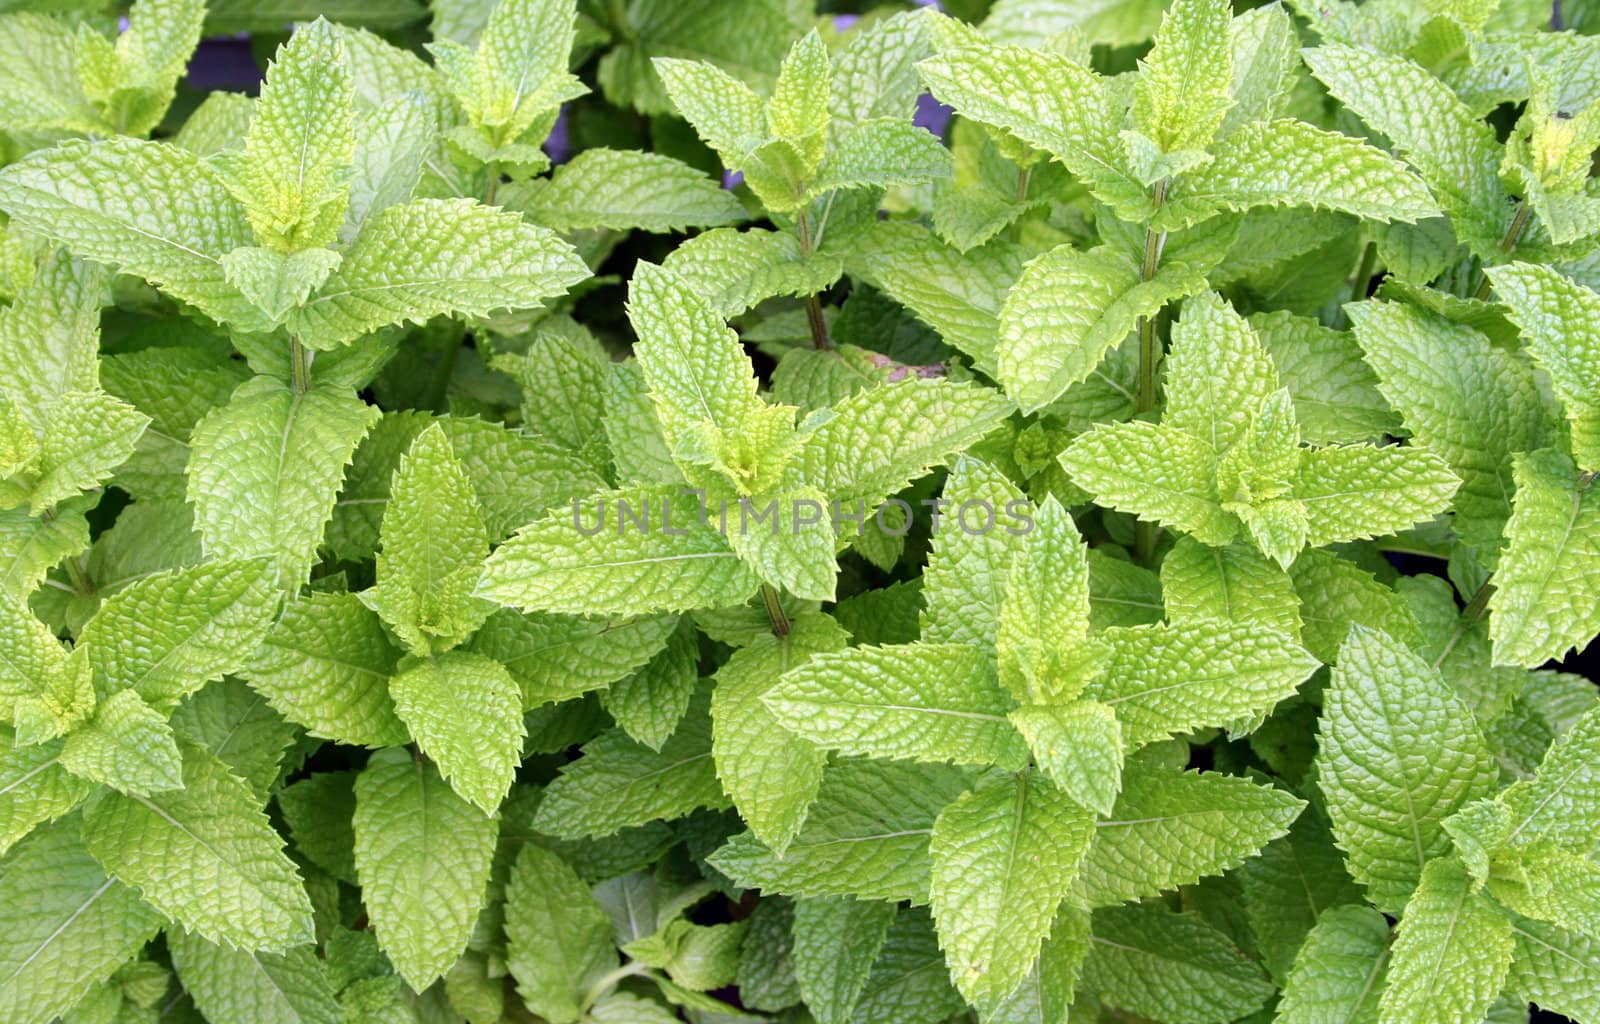 A patch of spearmint, fresh waiting to be picked